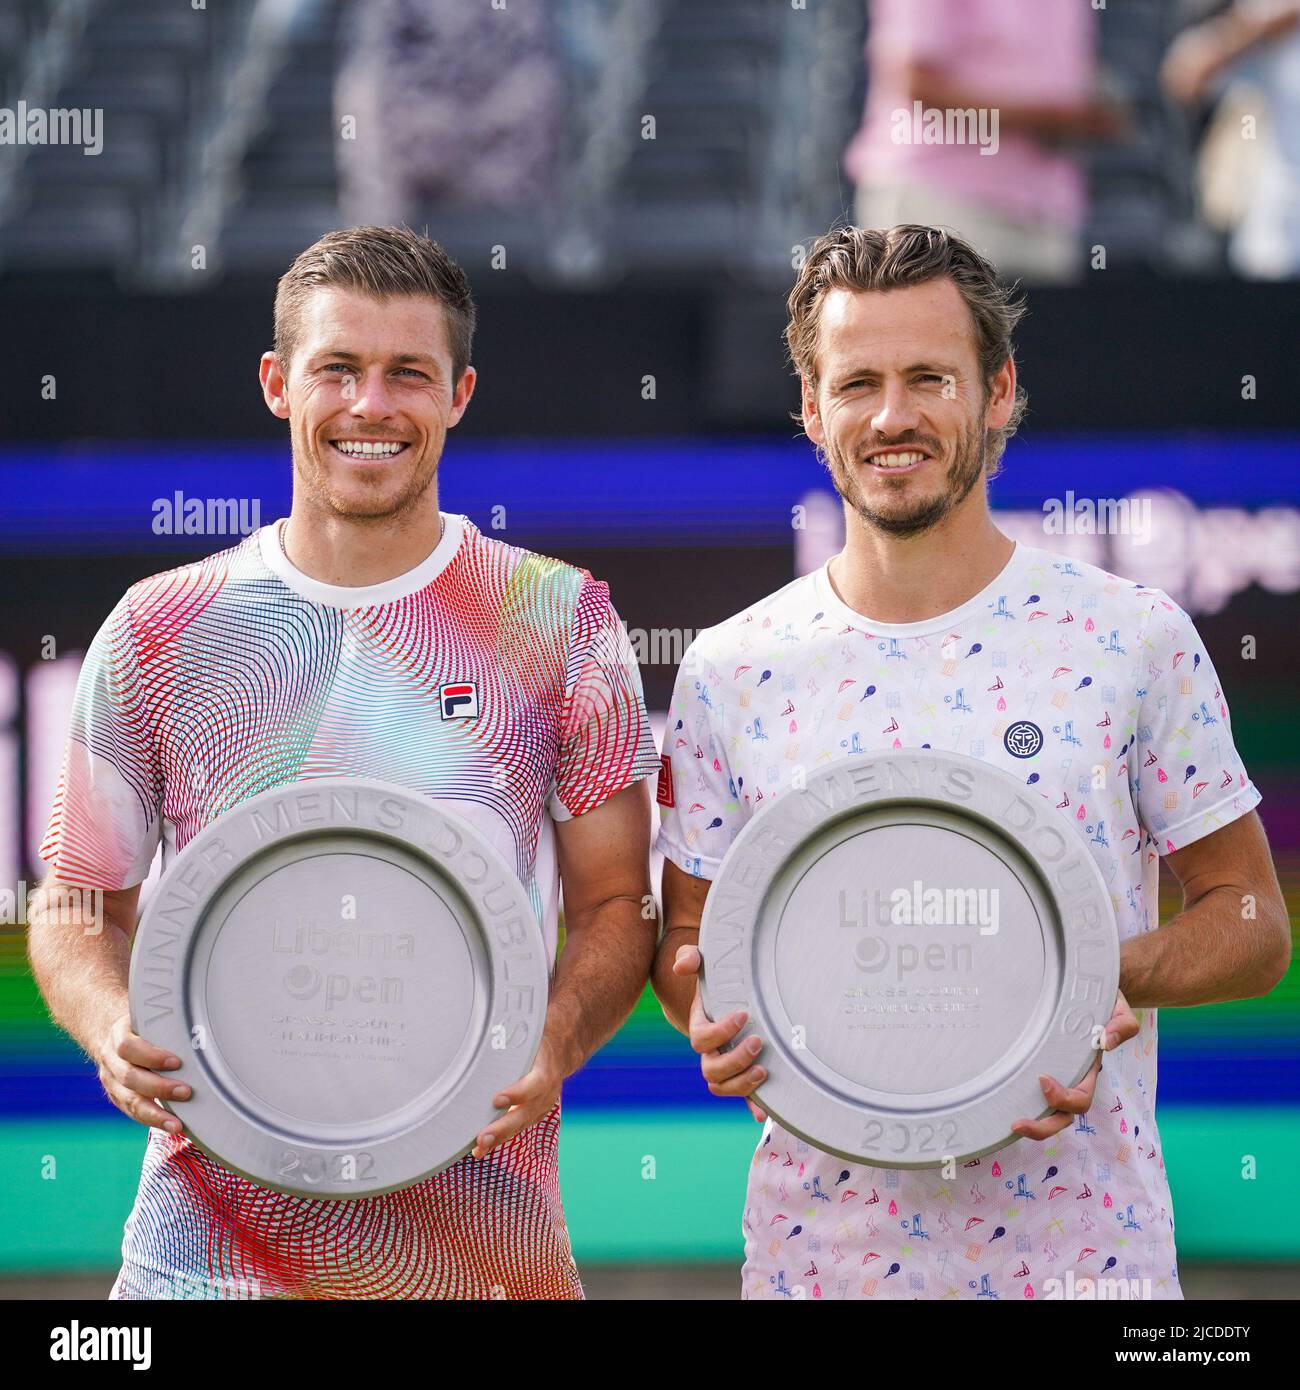 'S-HERTOGENBOSCH, NETHERLANDS - JUNE 12: Neal Skupski of Great-Britain and Wesley Koolhof of the Netherlands poses with their trophies after the Mens Doubles Final match between Matthew Ebden of Australia and Max Purcell of Australia and Wesley Koolhof of the Netherlands and Neal Skupski of Great-Britain at the Autotron on June 12, 2022 in 's-Hertogenbosch, Netherlands (Photo by Joris Verwijst/BSR Agency) Stock Photo